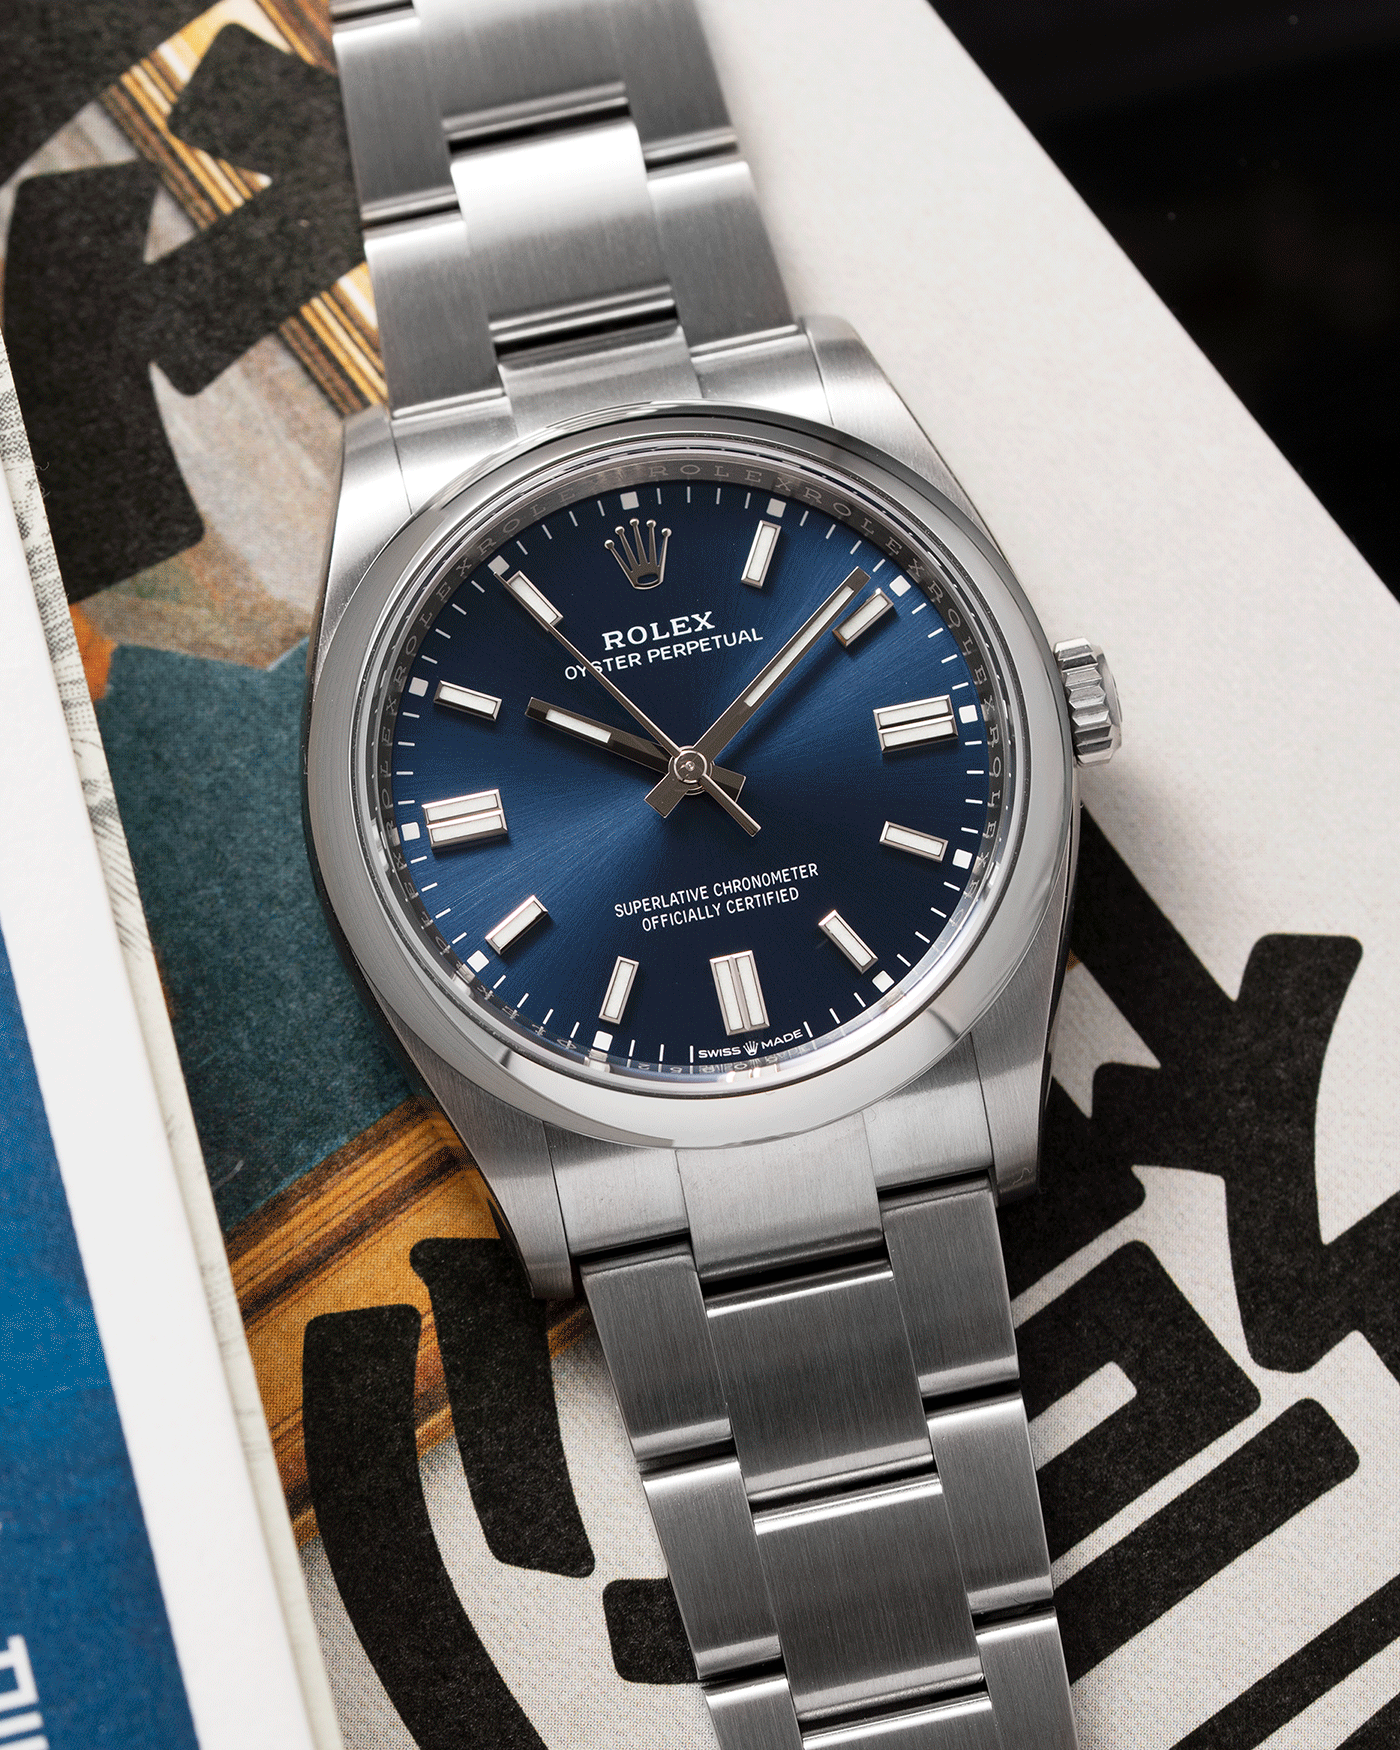 Brand: Rolex Year: 2020 Model: Oyster Perpetual 36 Reference Number: 126000 Material: 904L Stainless Steel Movement: Cal. 3230 Case Diameter: 36mm Bracelet: Stainless Steel Rolex Oyster Bracelet